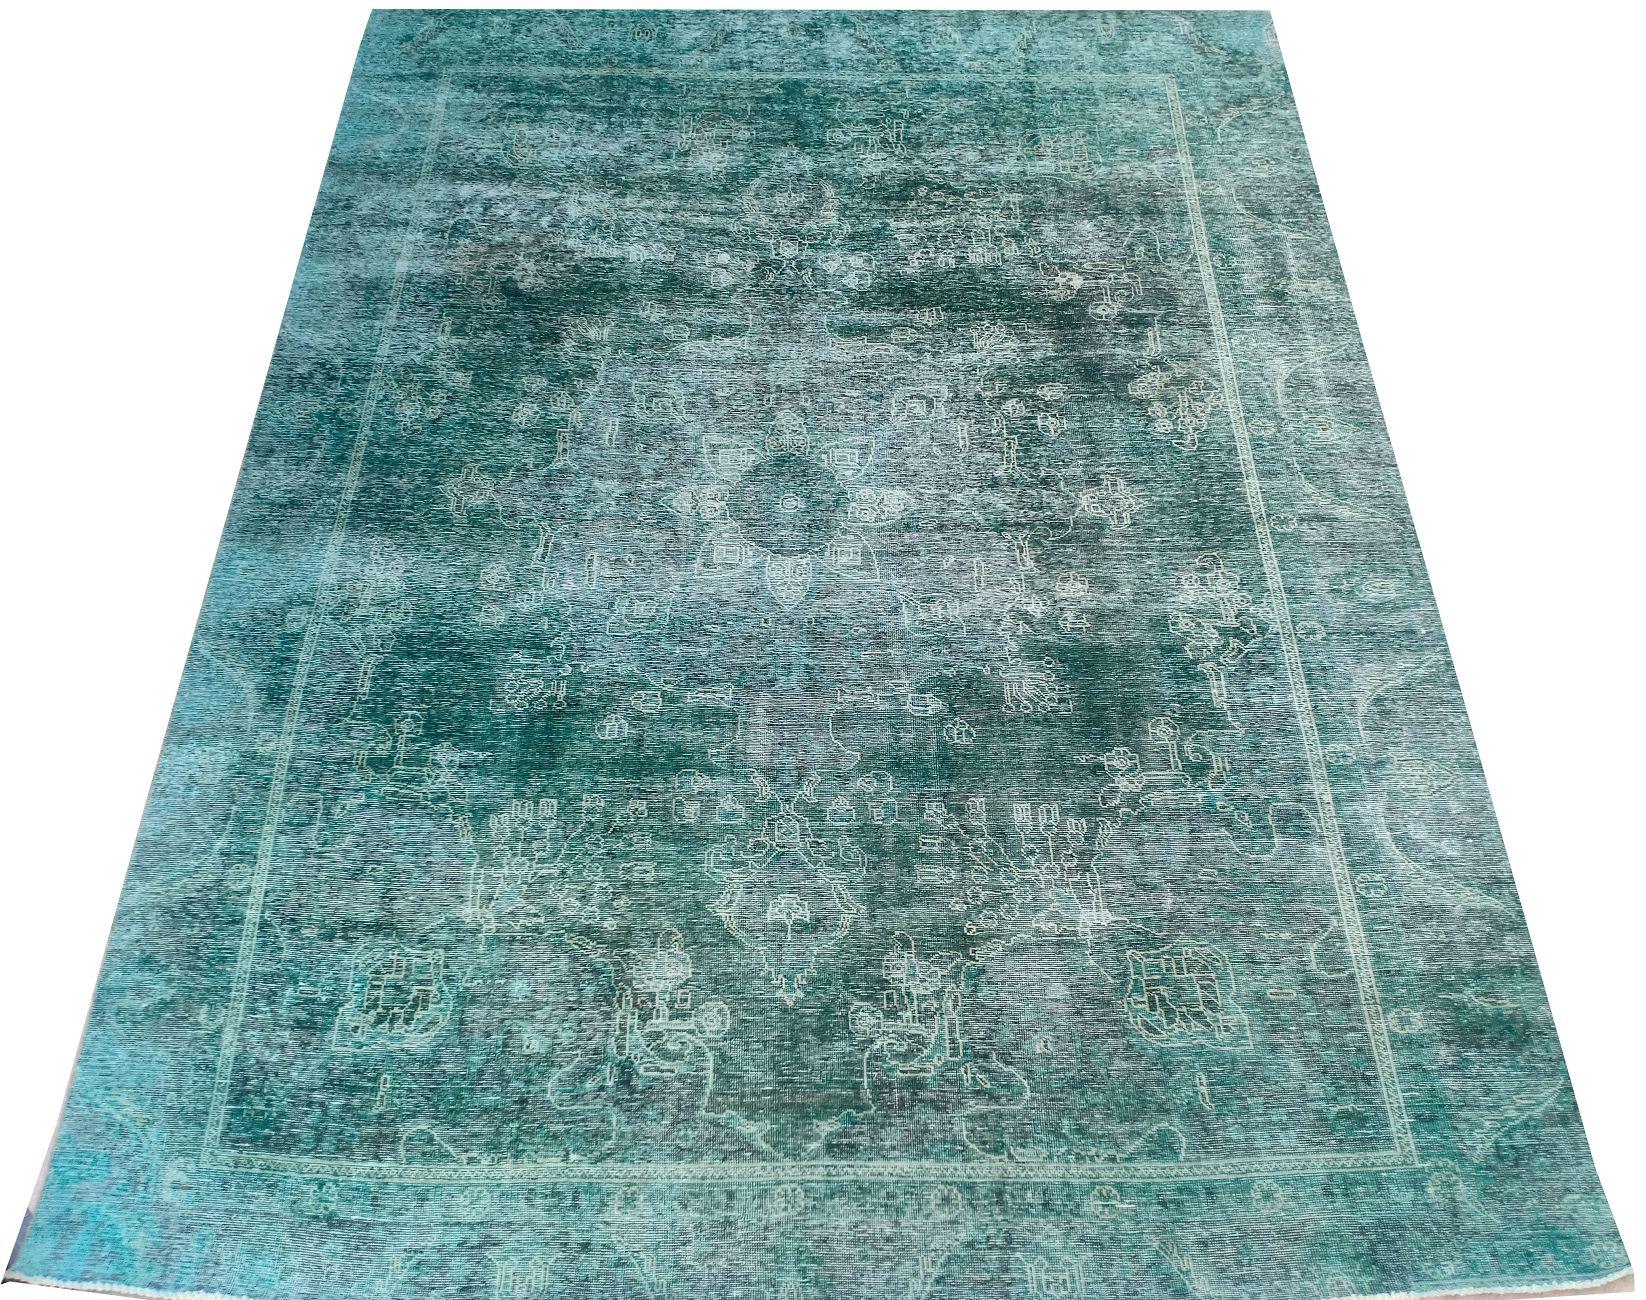 Hand-knotted wool pile on a cotton foundation.

Distressed, antique wash.

Circa 1940

Dimensions: 9' x 12'2